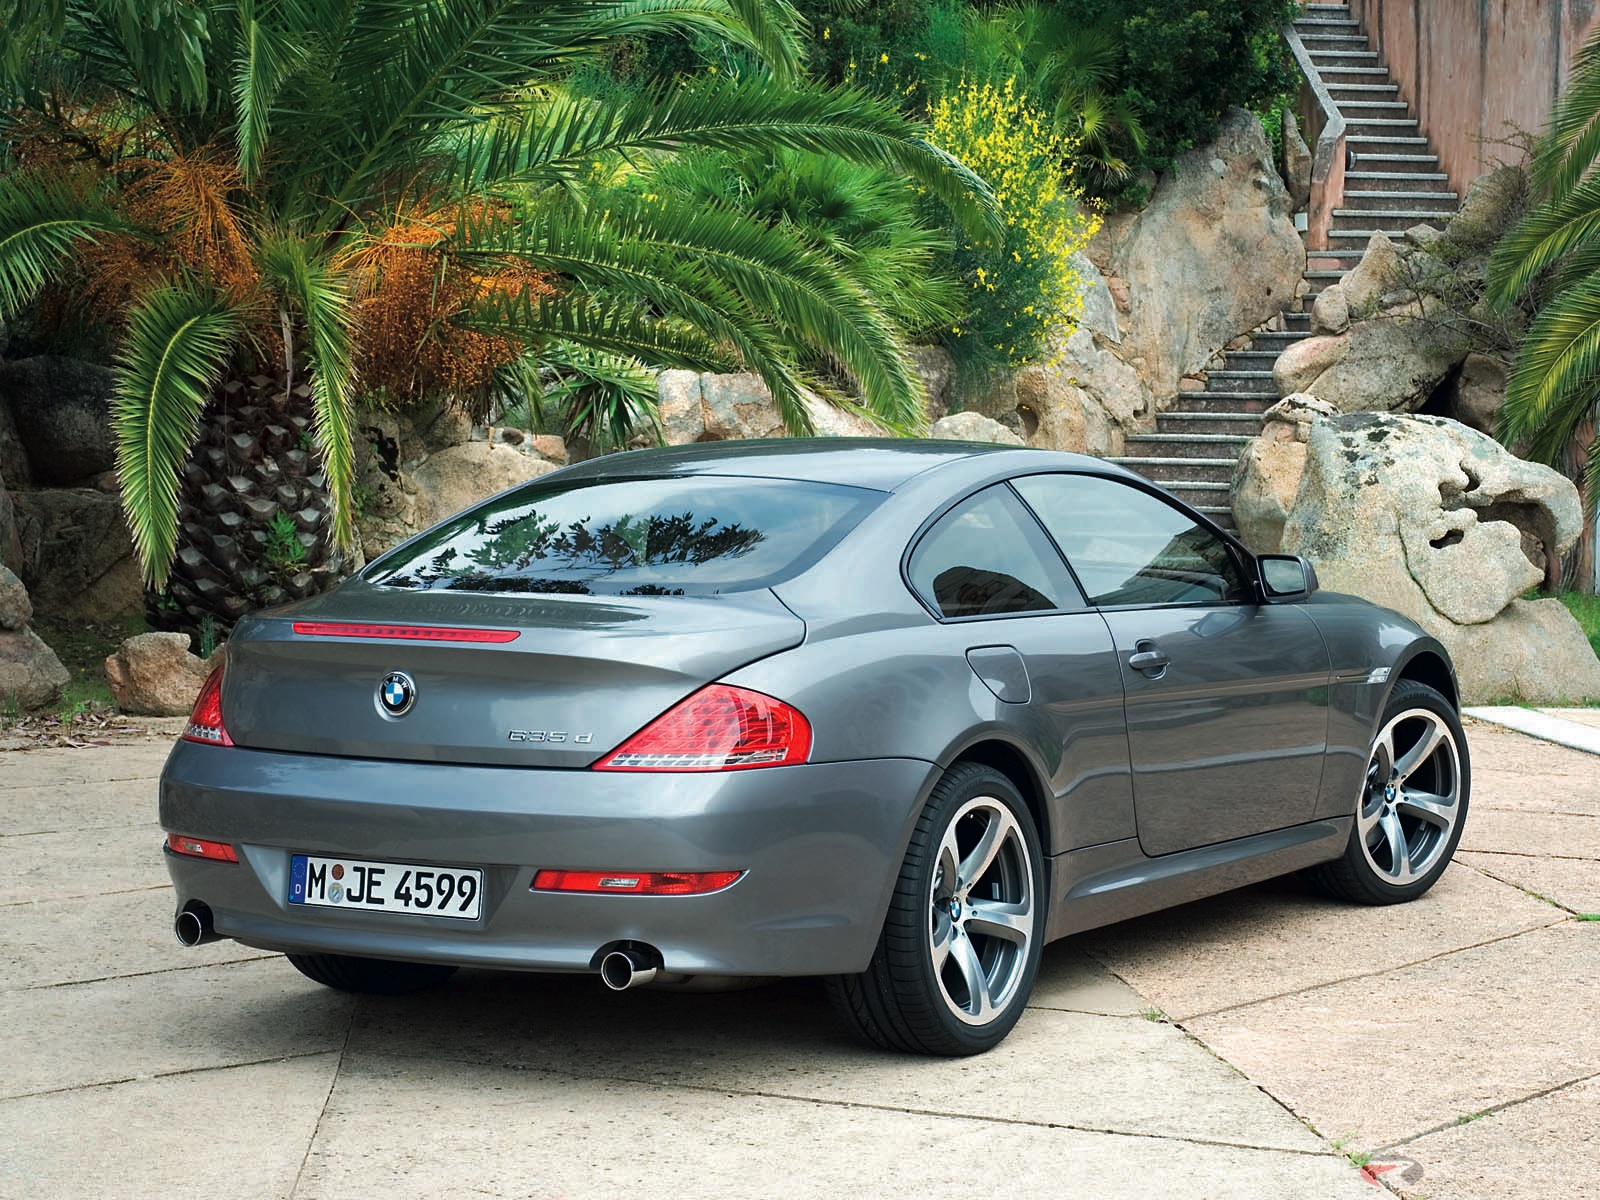 Within the high quality convertible marketplace, the actual BMW 650i